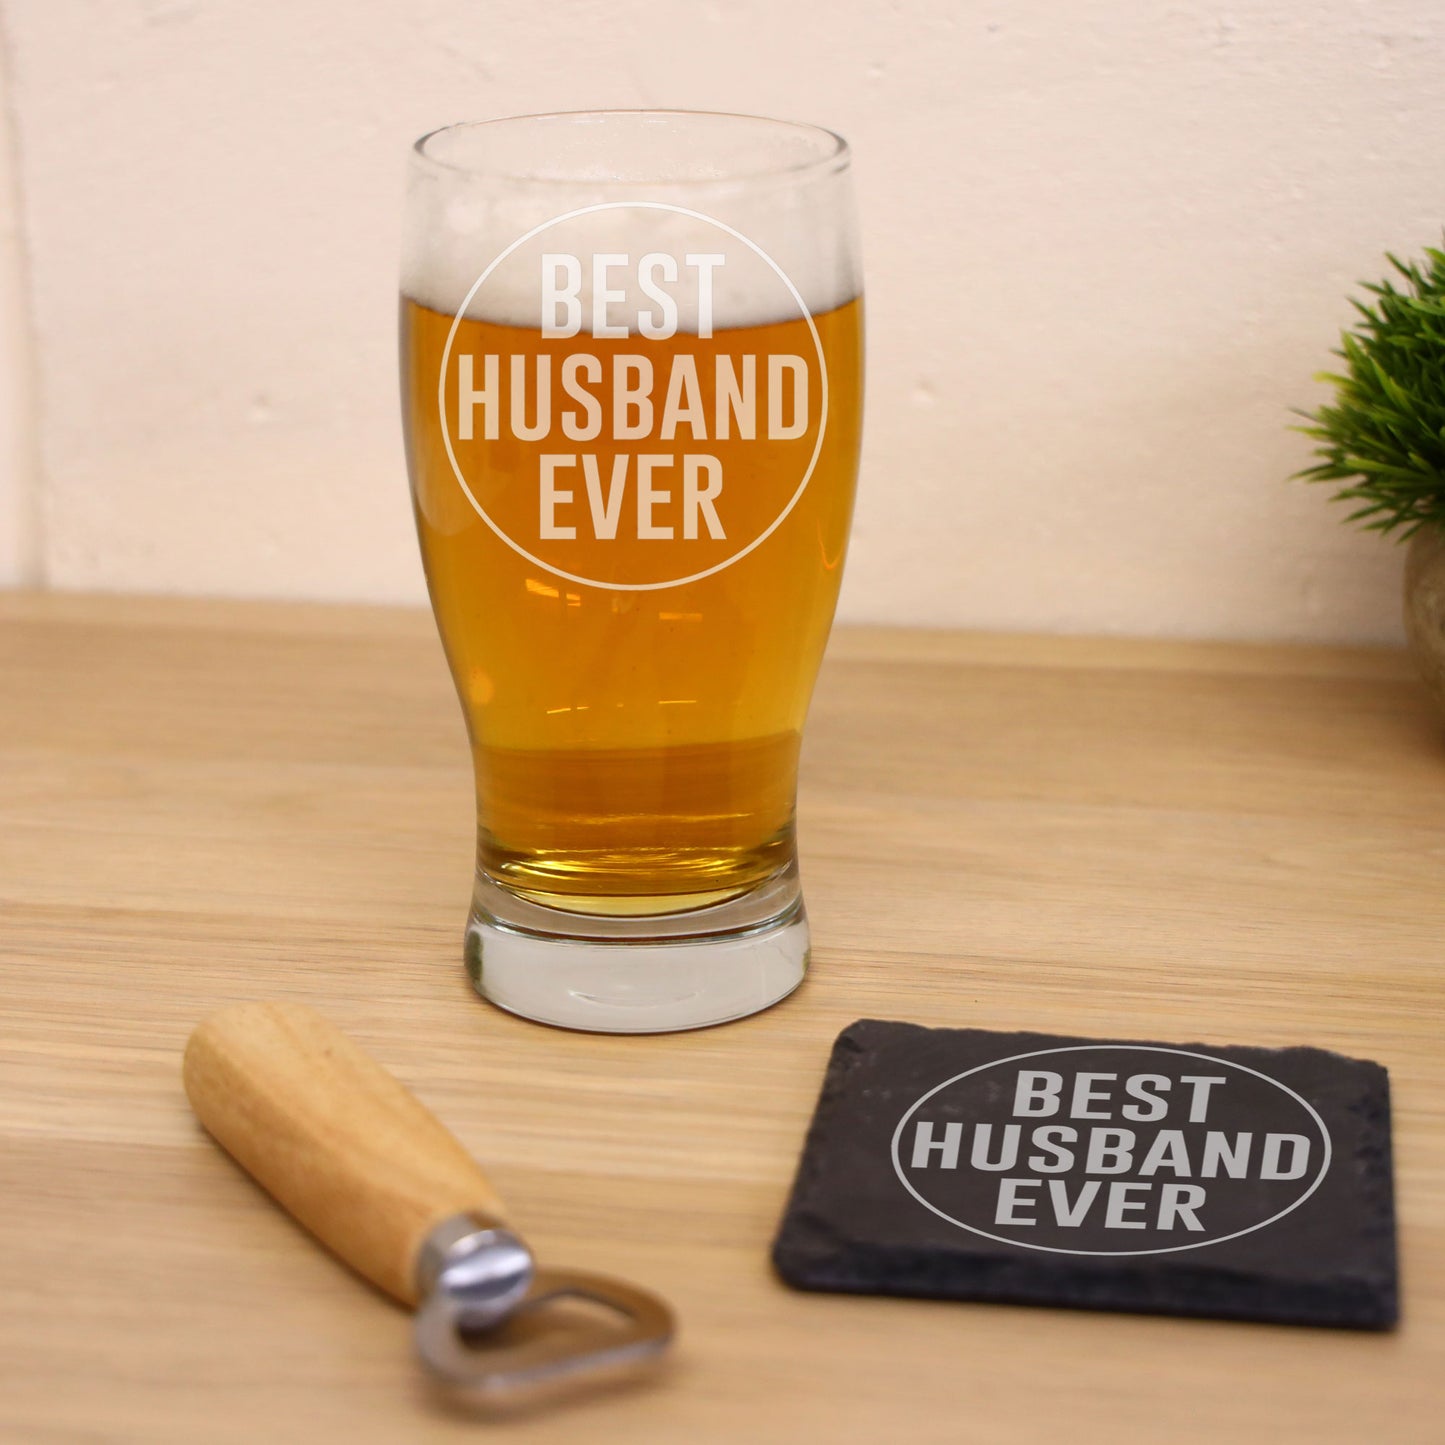 Best Husband Ever Engraved Beer Pint Glass and/or Coaster Set  - Always Looking Good - Glass & Square Coaster Set  